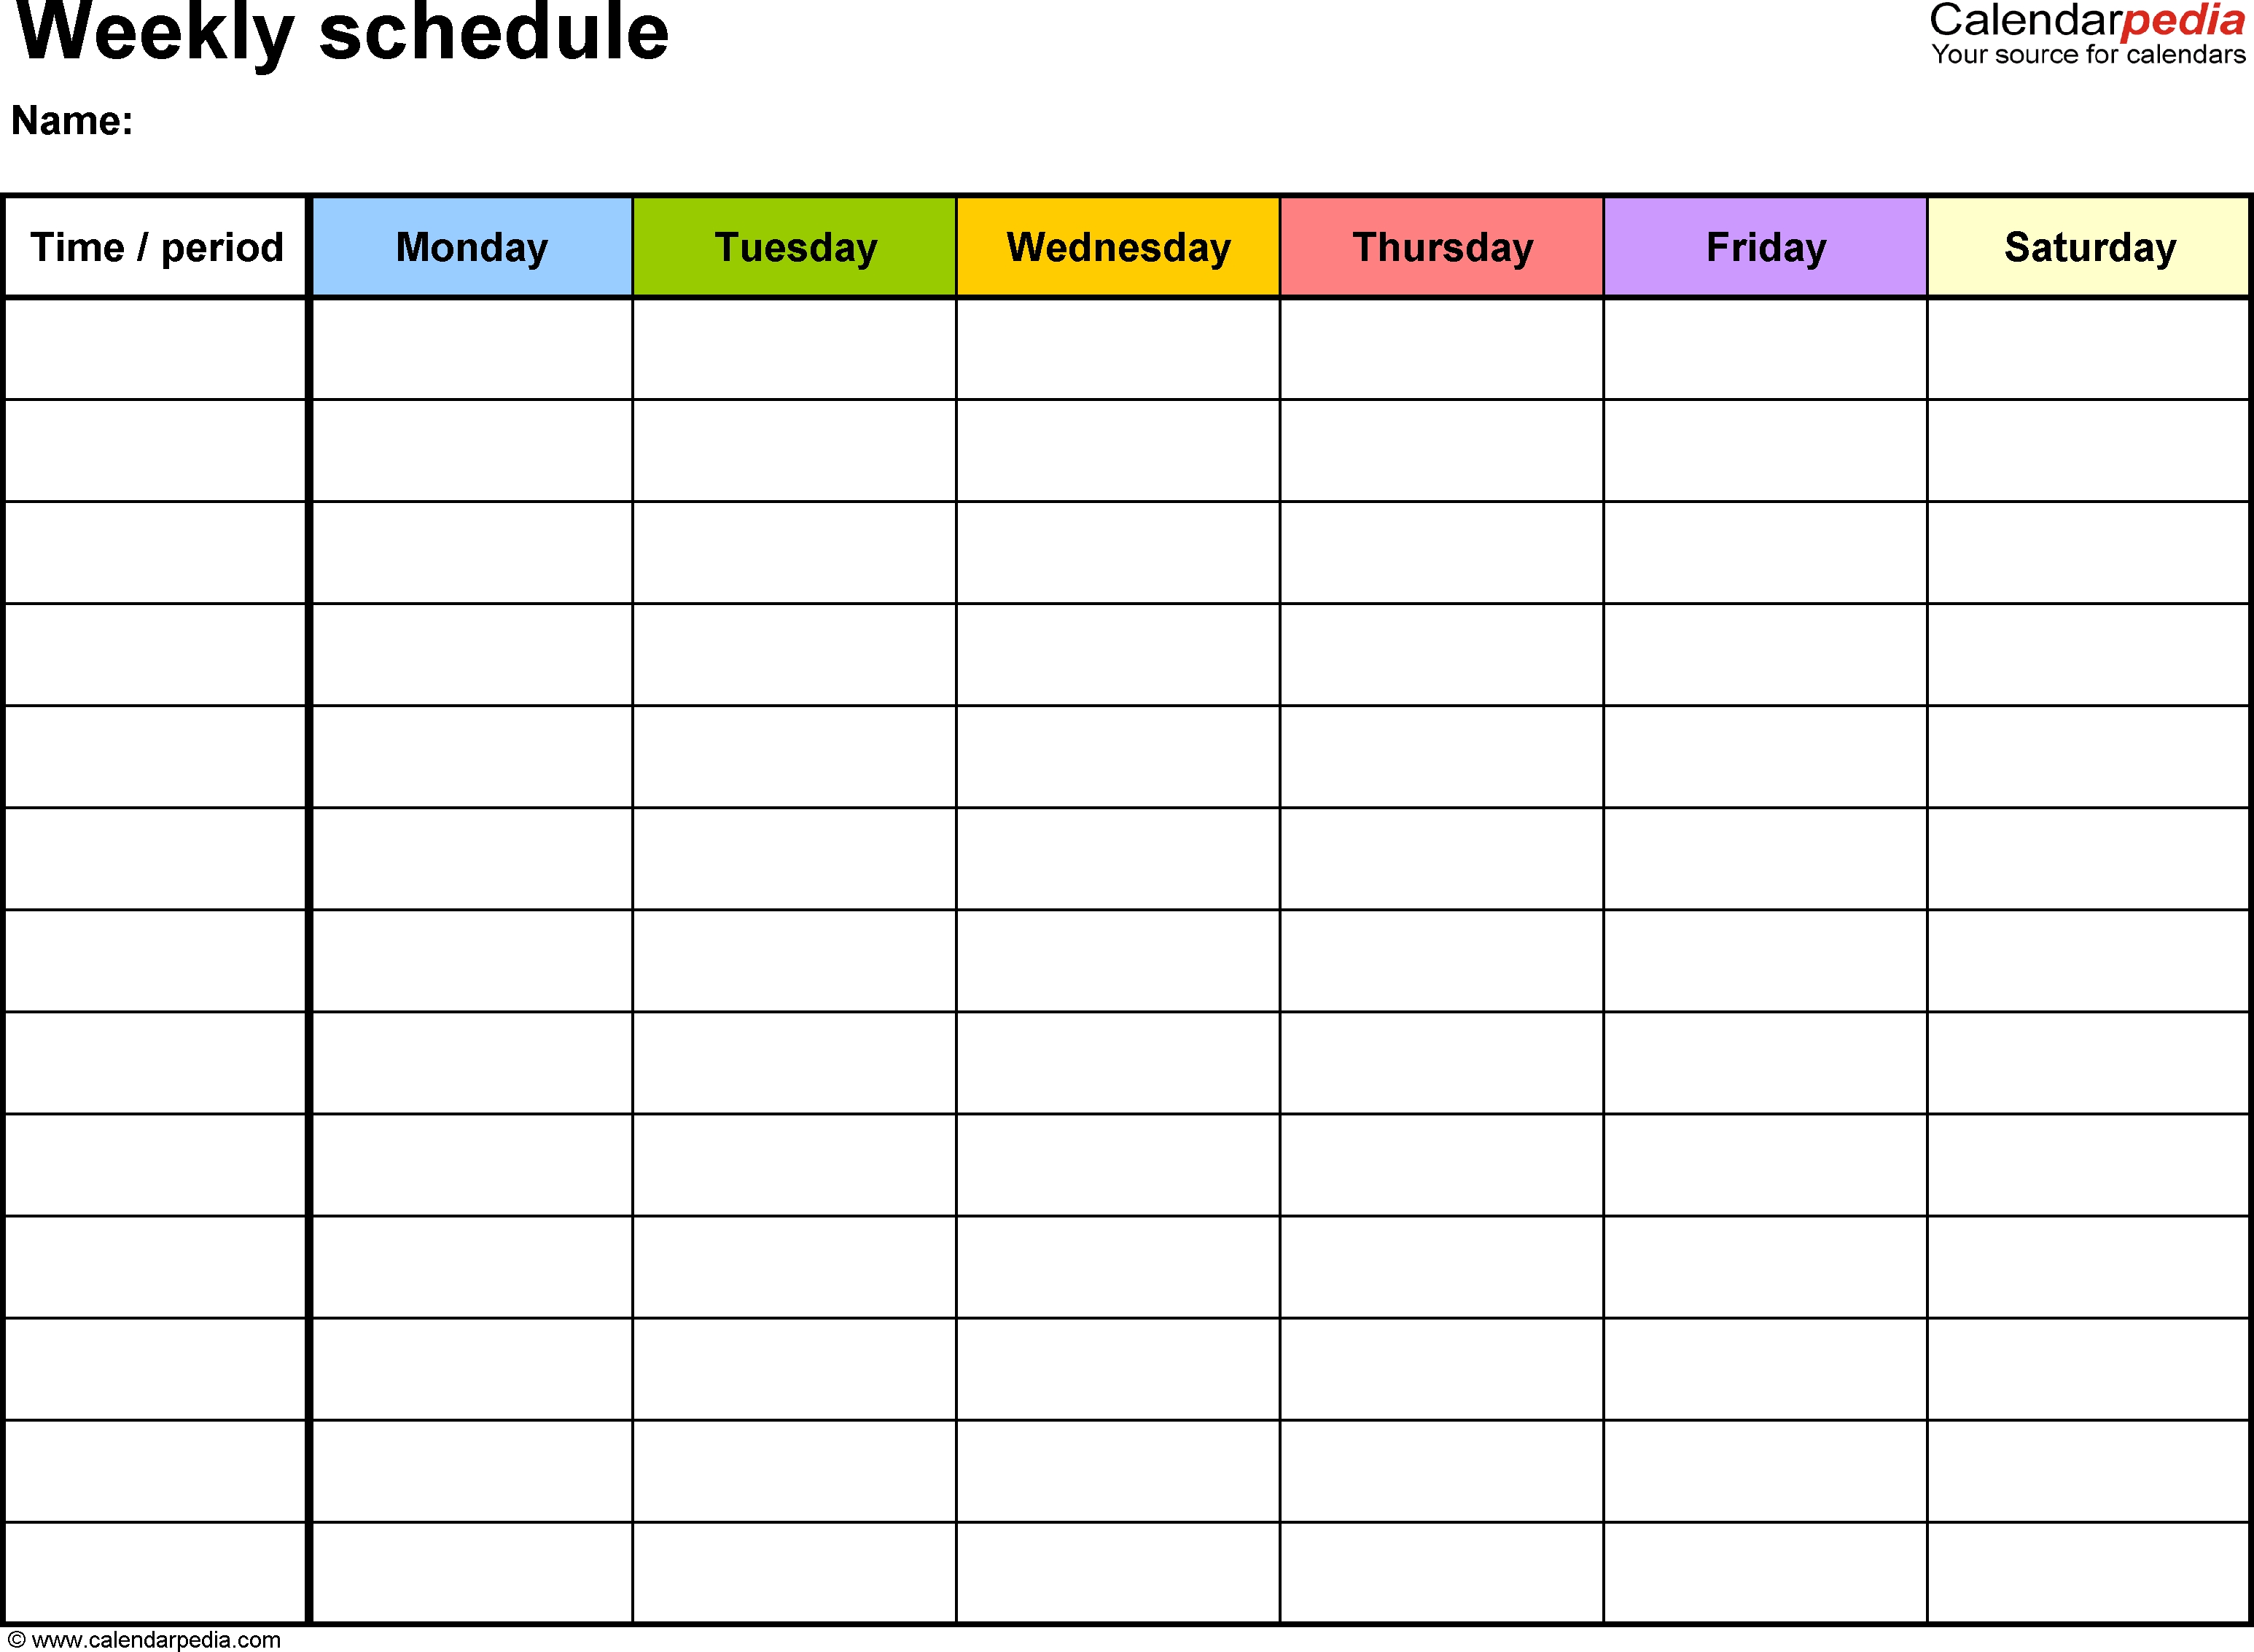 Free Weekly Schedule Templates For Word - 18 Templates-Monday - Friday Diary Template